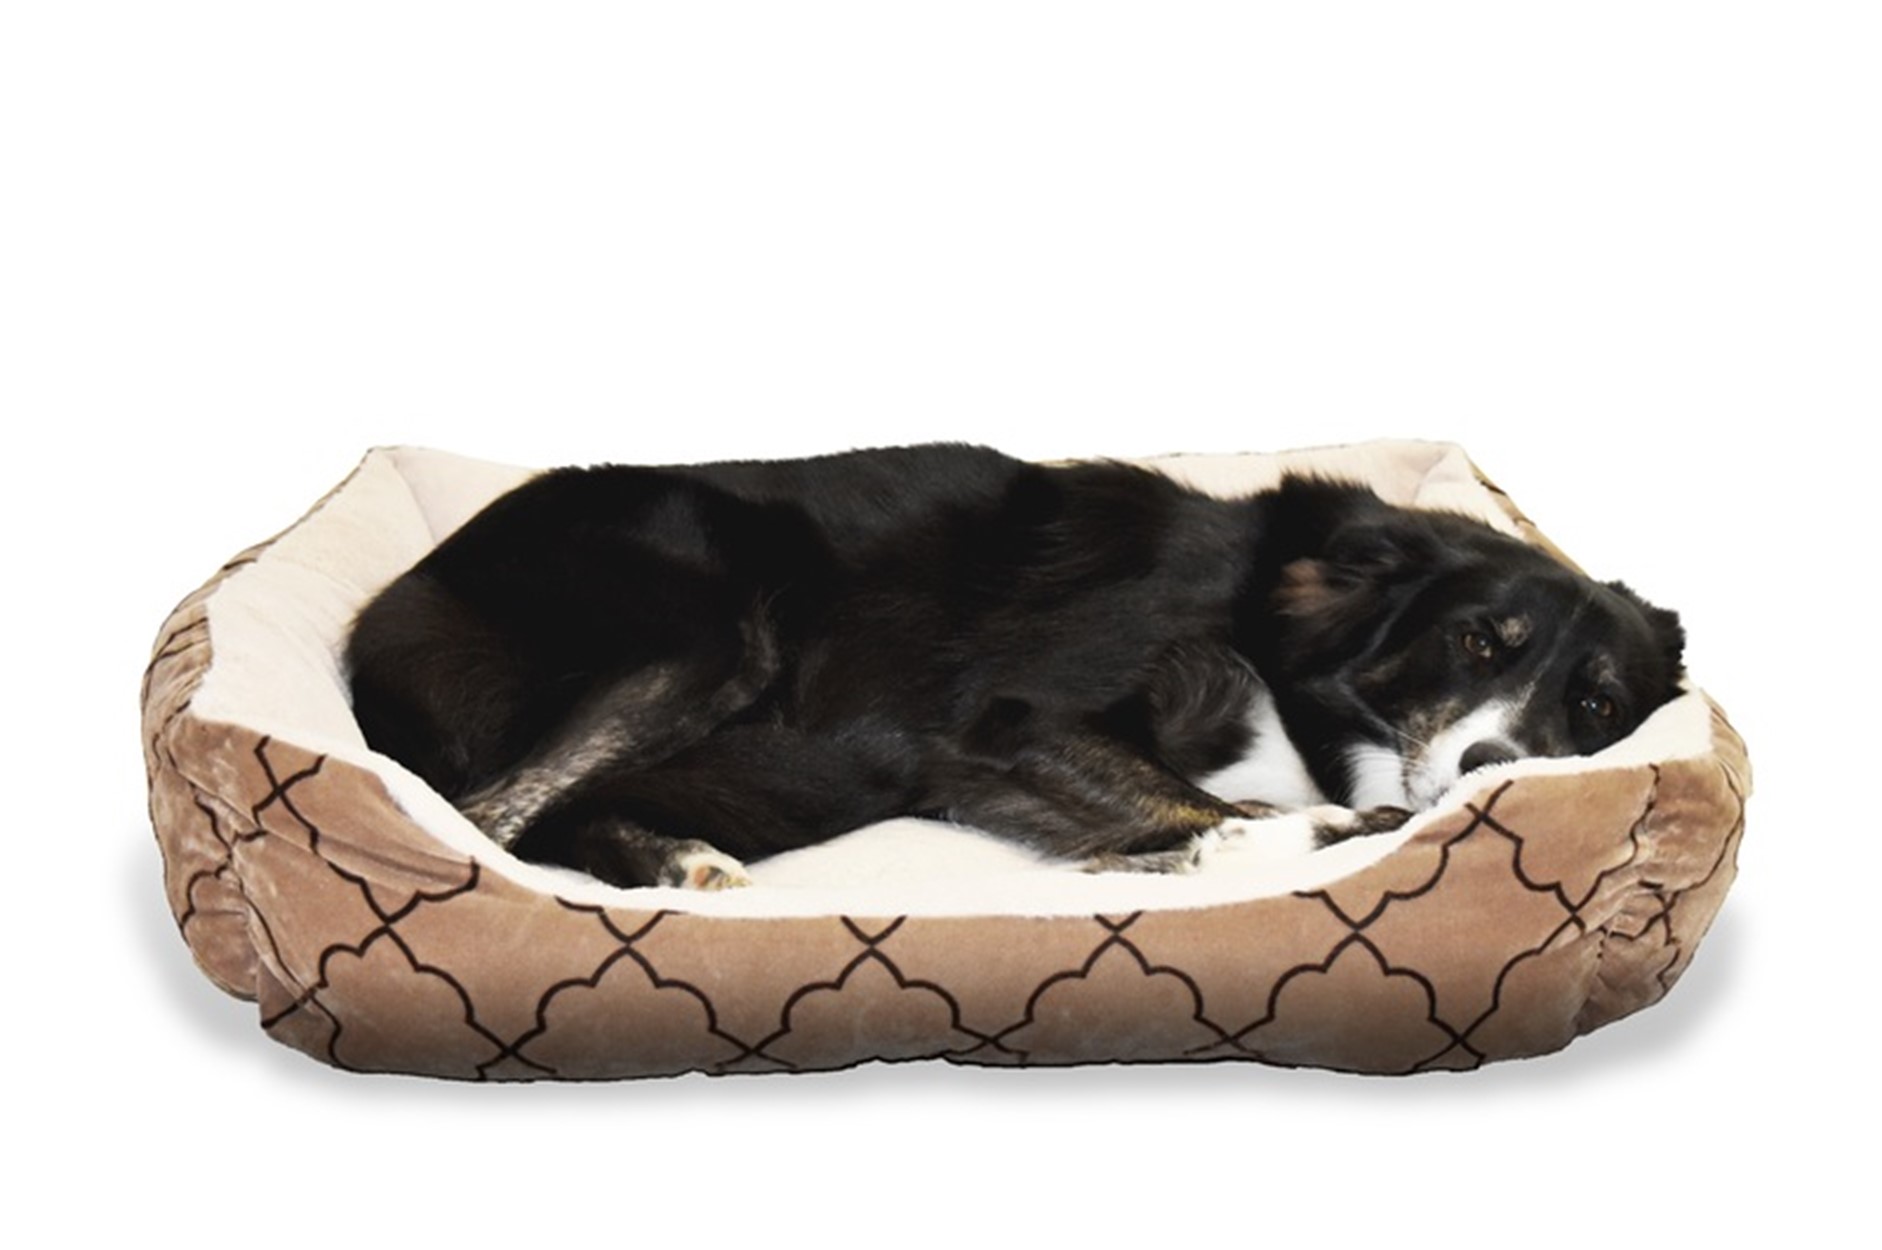 Important Things You Should Know About Eco-Friendly Dog Beds